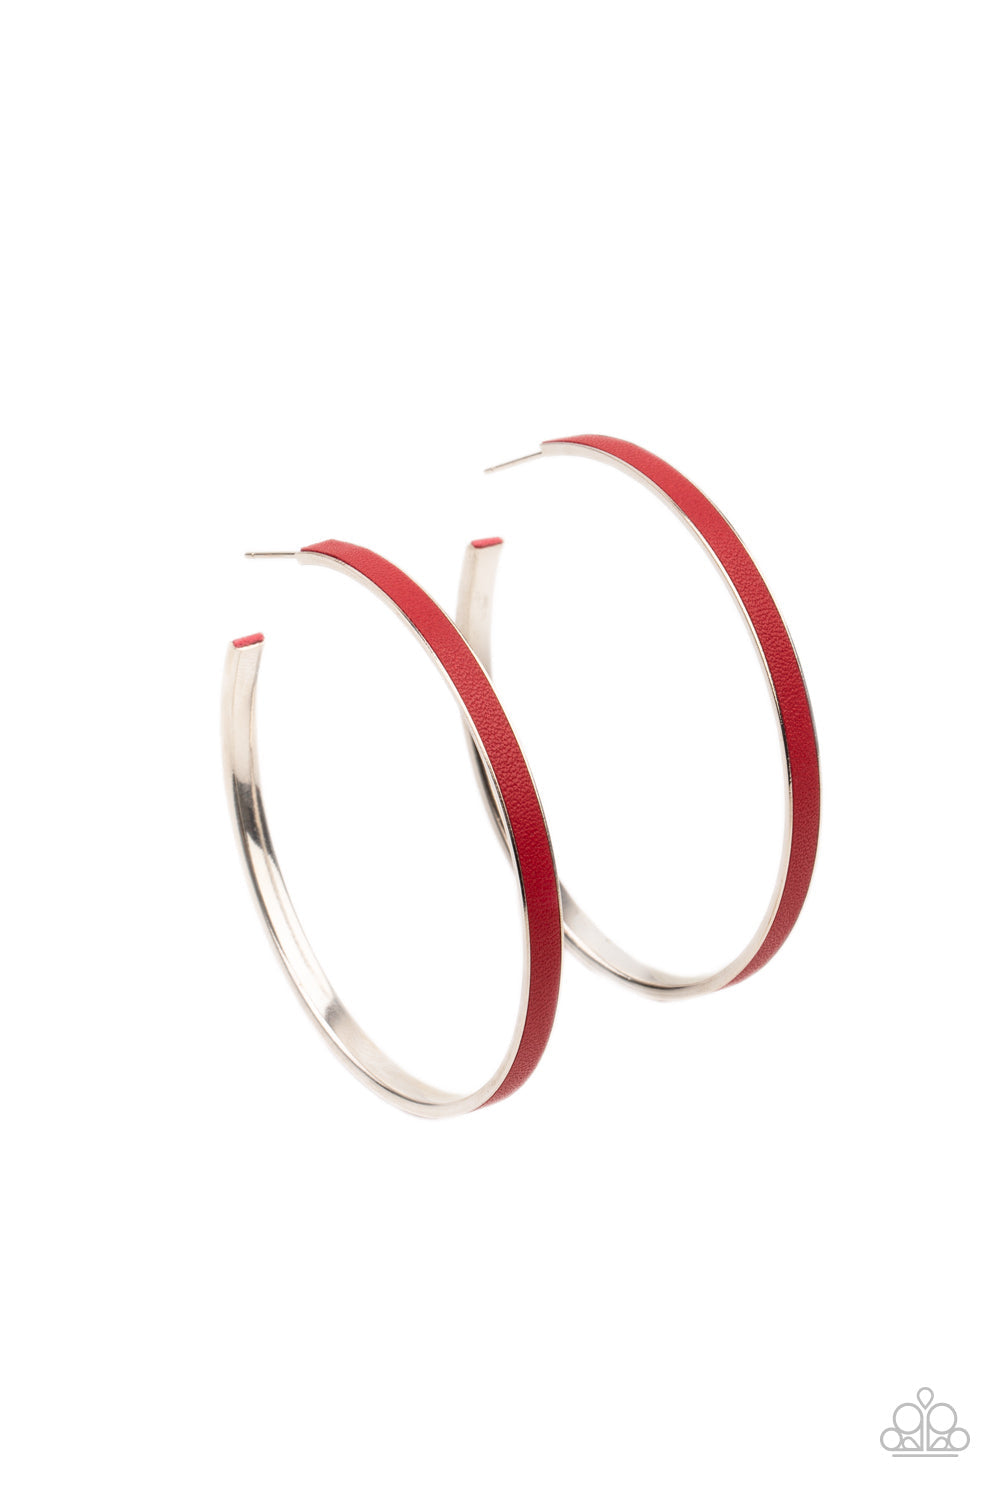 ​Fearless Flavor - Red and Silver Leather  Hoop Earrings - Paparazzi Accessories - A red leather lace is pressed along the indented spine of a silver hoop, creating a bold pop of color. Earring attaches to a standard post fitting. Hoop measures approximately 2 1/4" in diameter. Sold as one pair of hoop earrings.